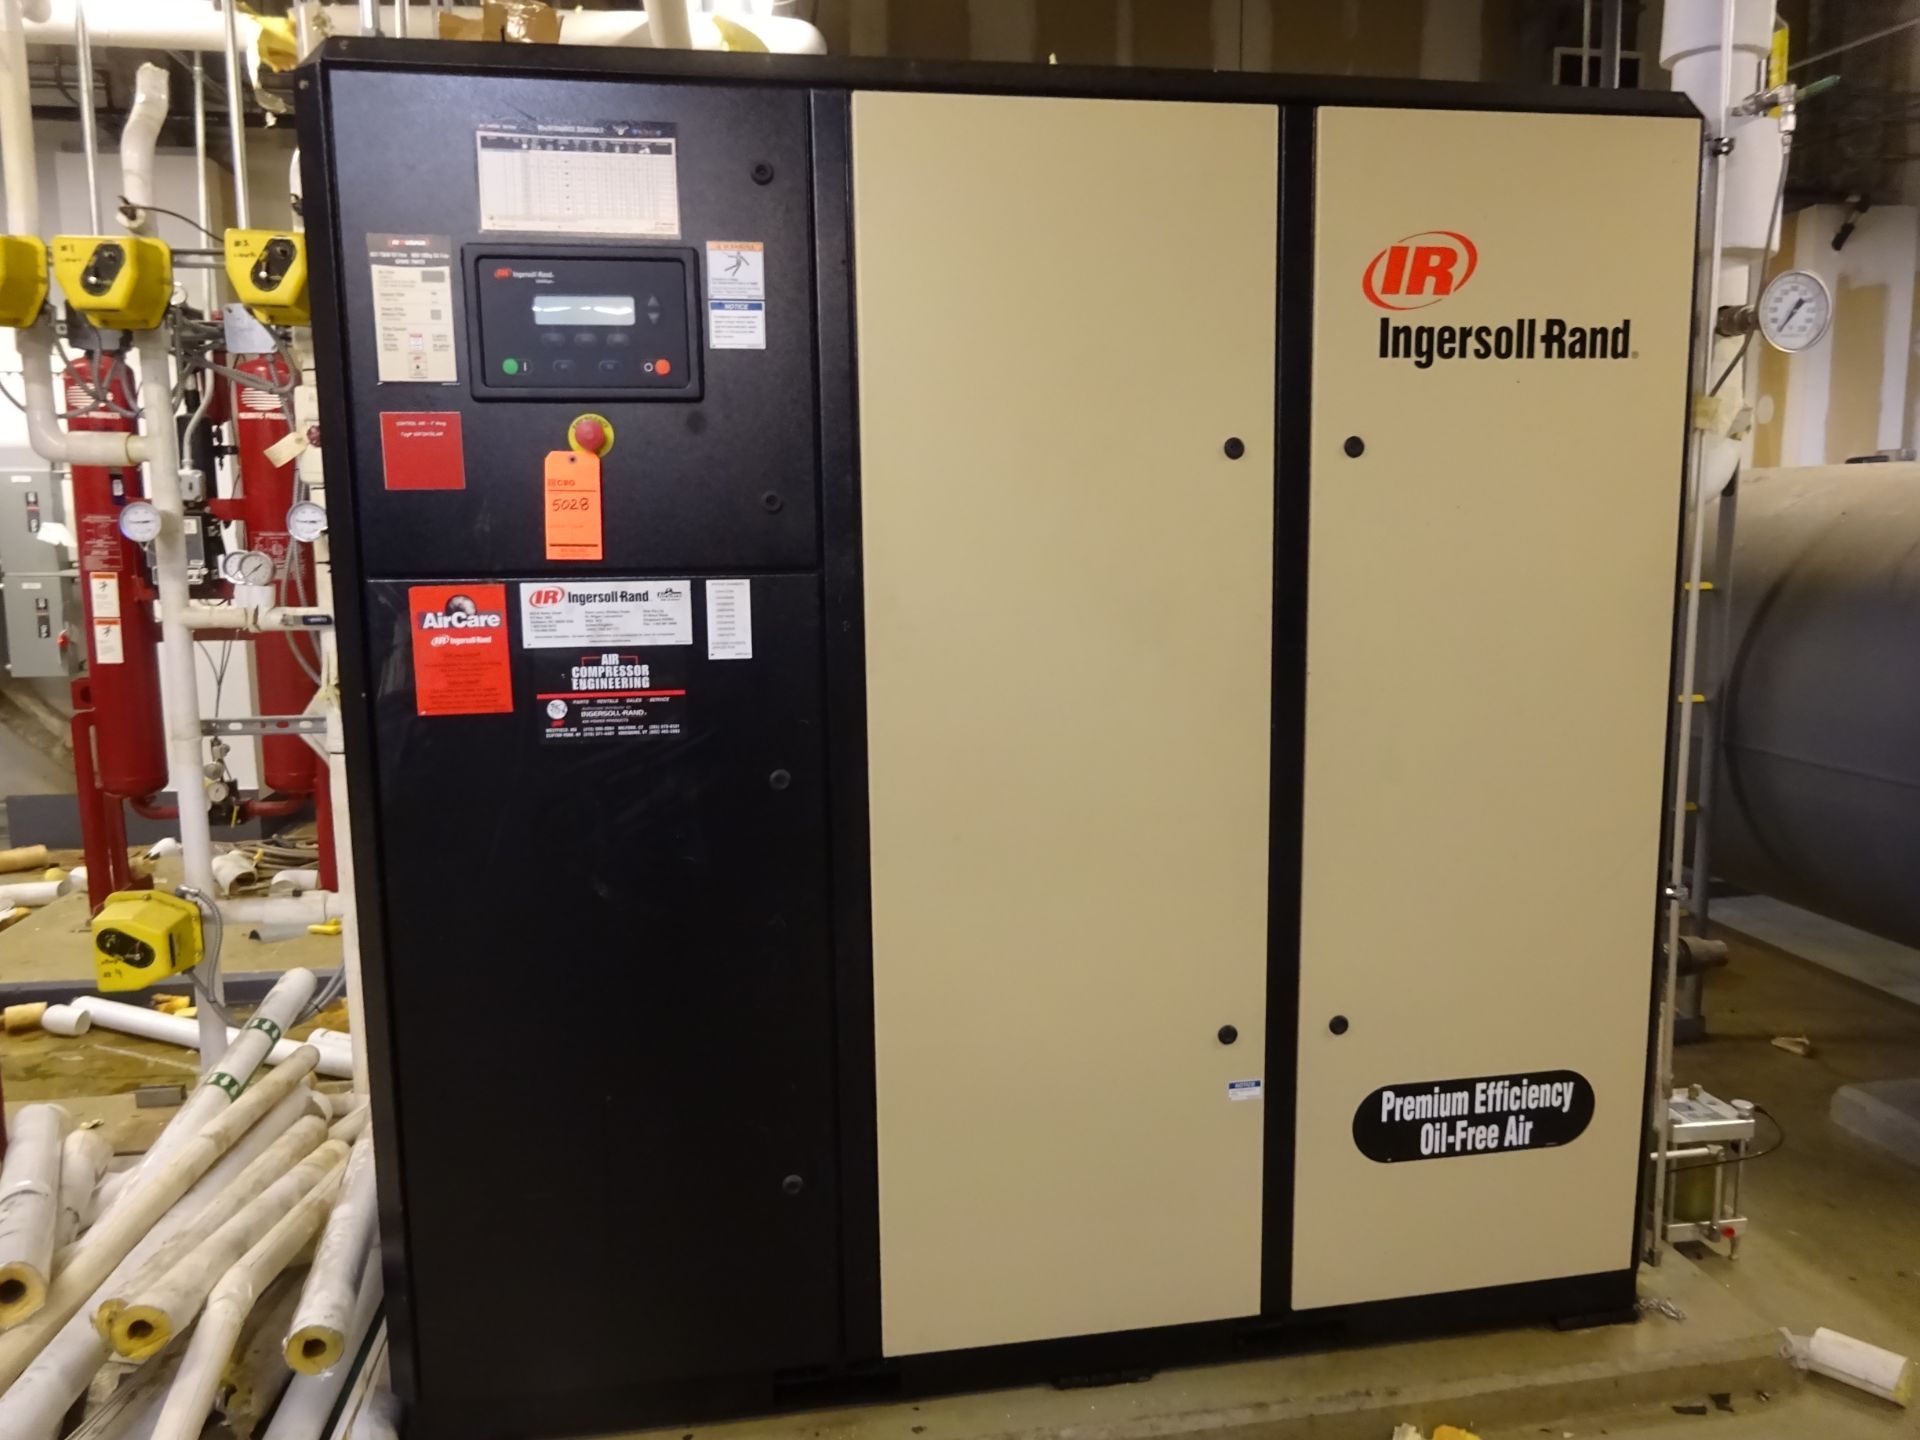 2005 Ingersoll Rand model # IRN60H-0F 60 HP oil-free rotary screw air compressor, with DHA model #